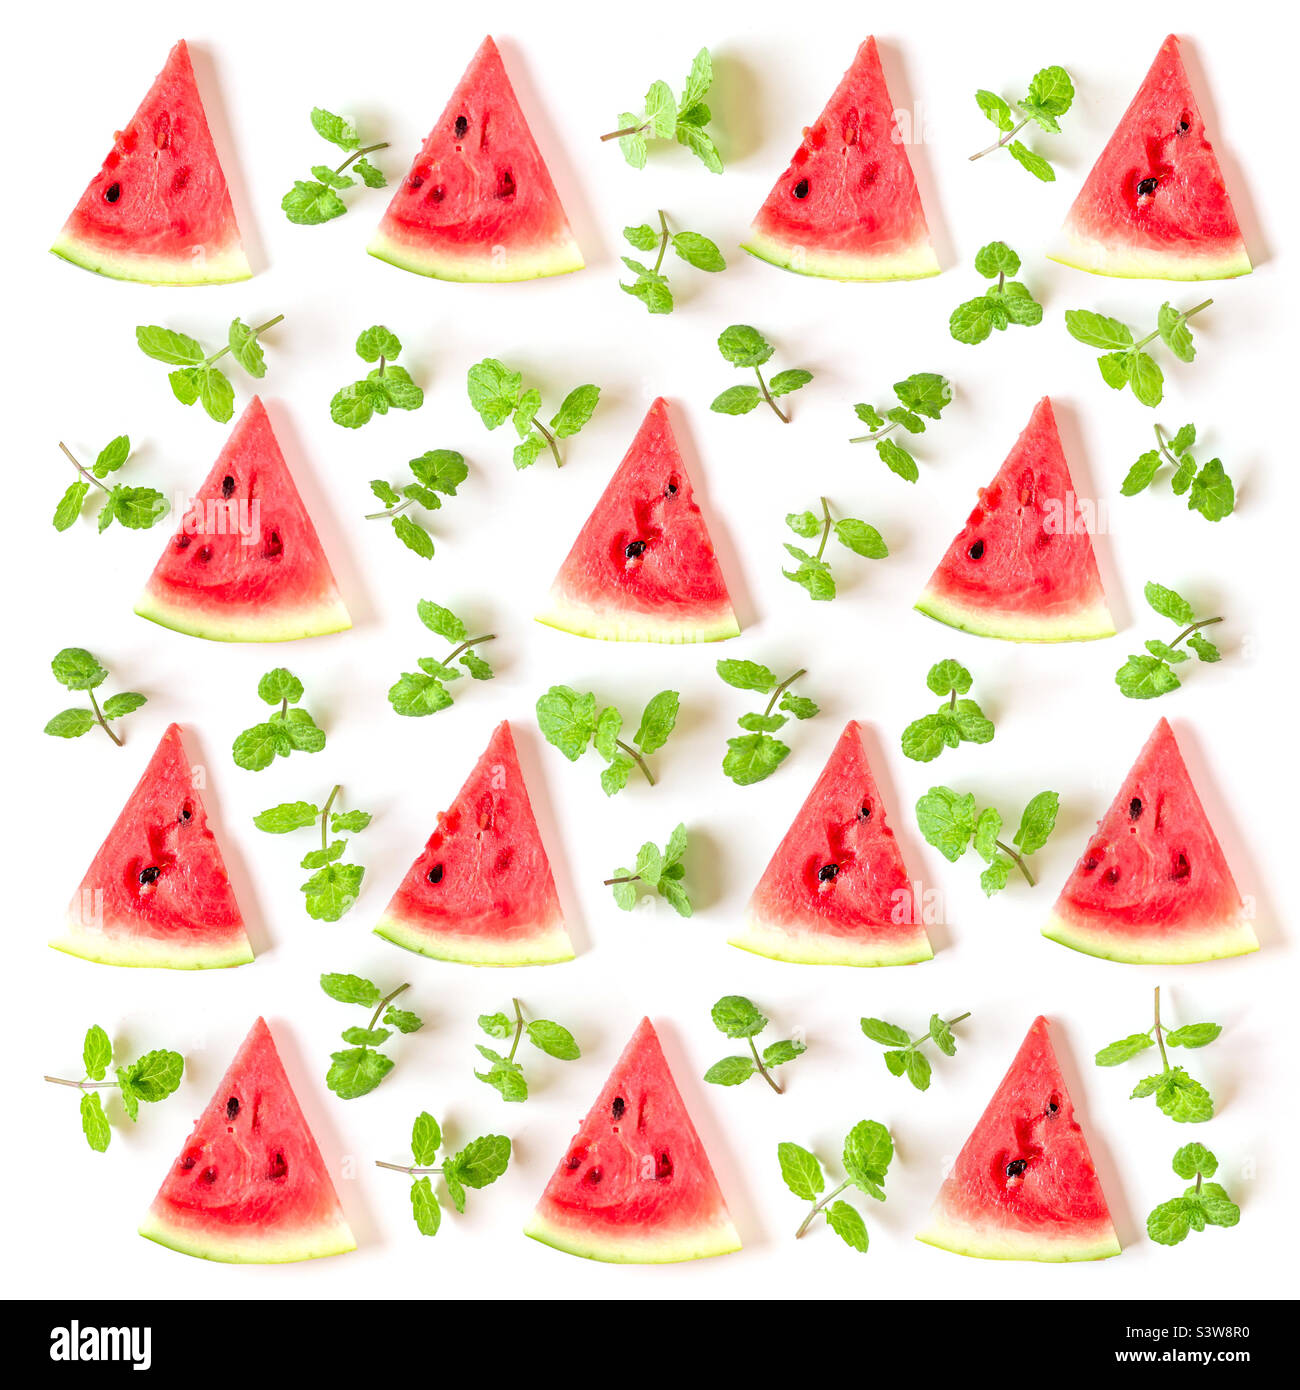 Juicy slices of fresh watermelon with mint leaves, top view flatlay in a square format Stock Photo